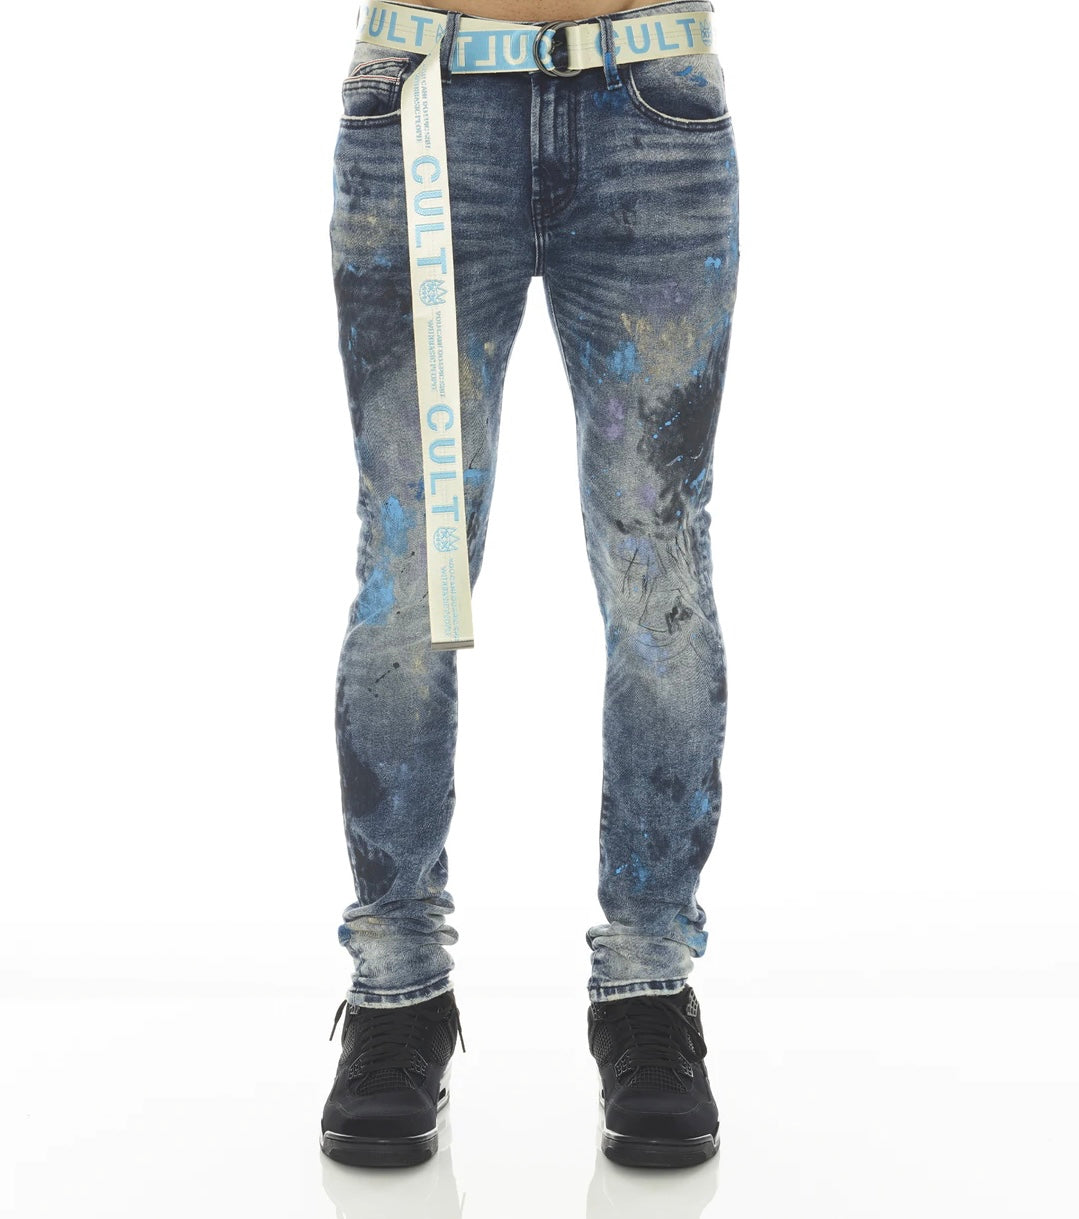 CULT OF INDIVIDUALITY "PUNK SUPER SKINNY STRETCH w/BABY BLUE BELT IN ABSTRACT" JEANS